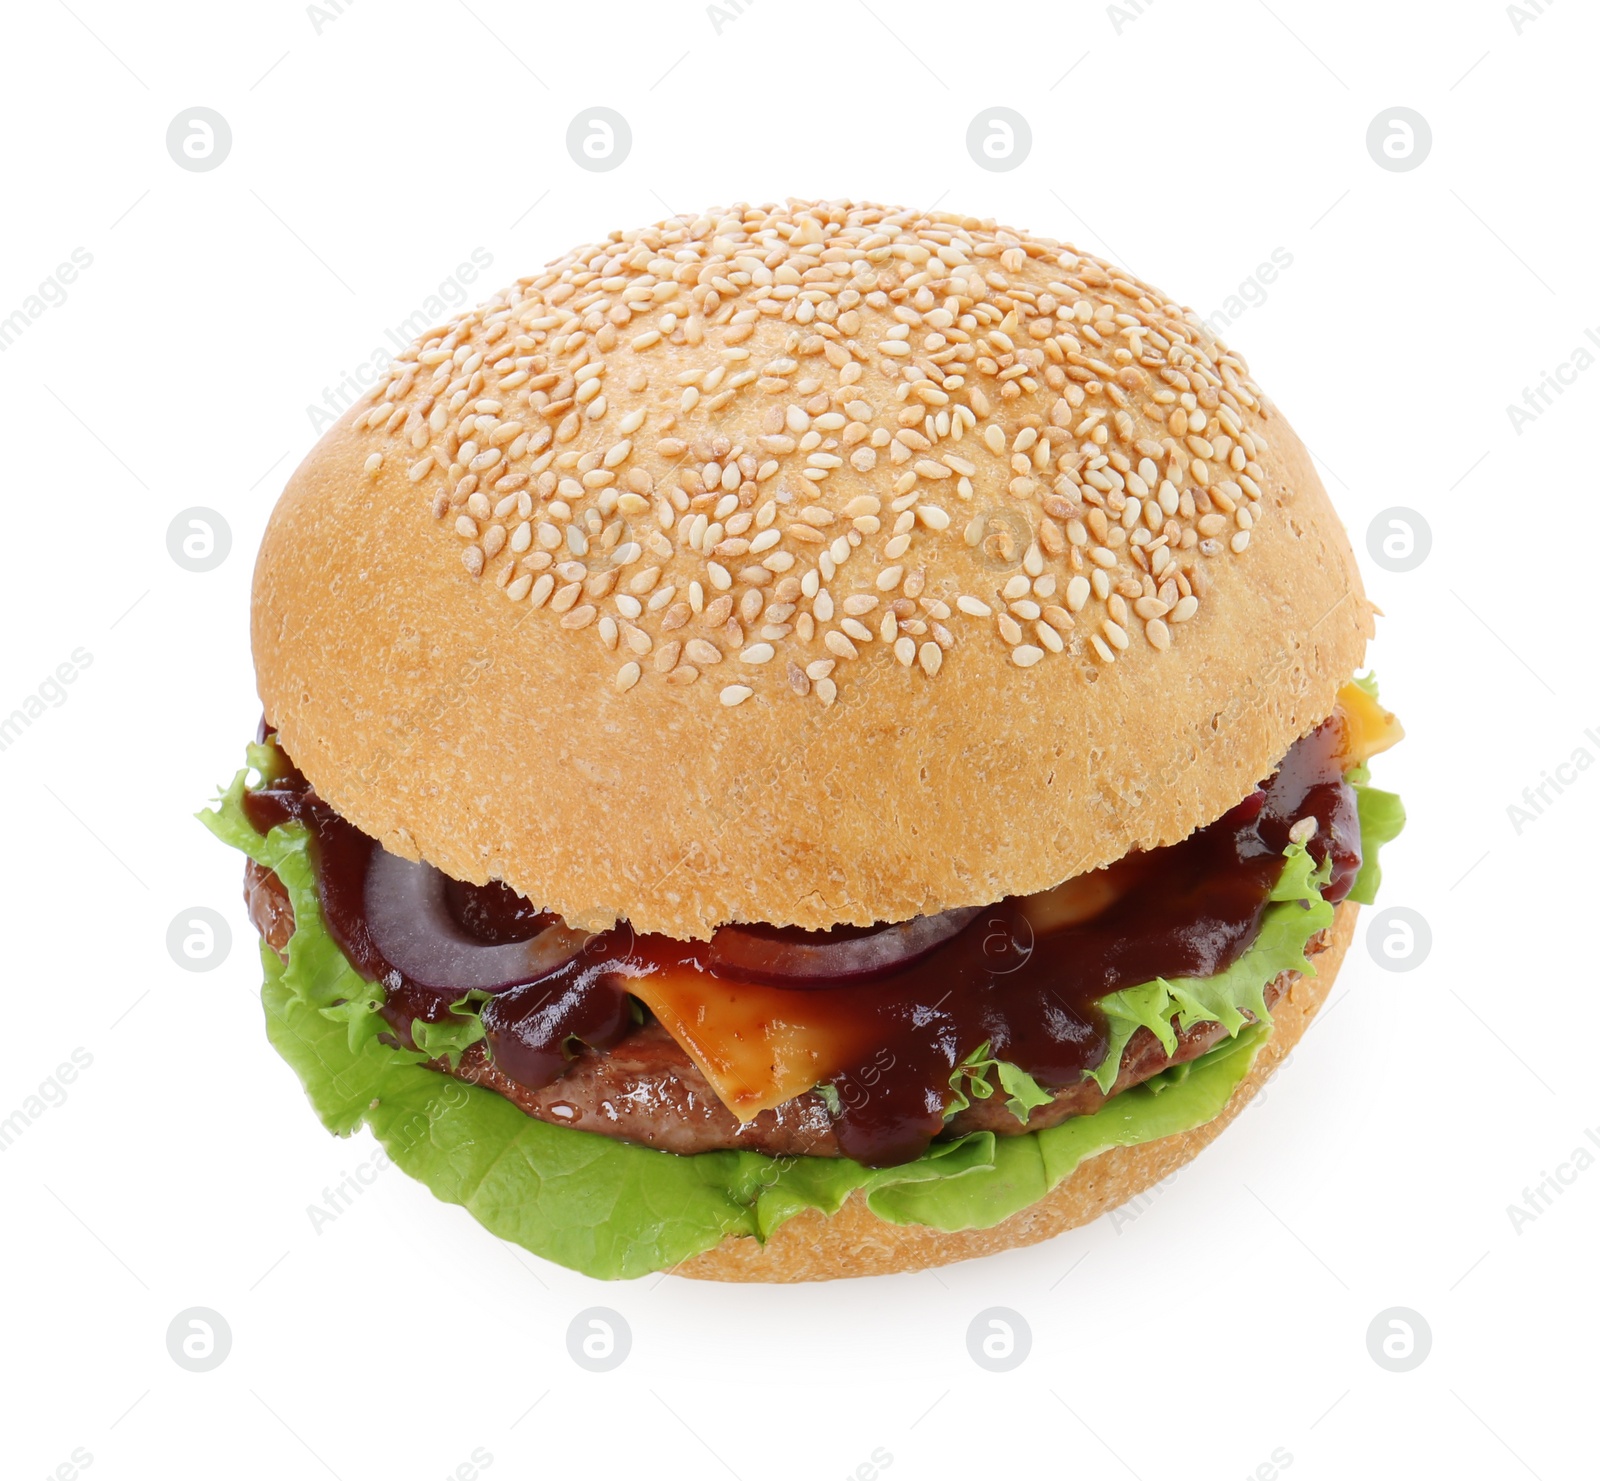 Photo of Delicious cheeseburger with lettuce, onion, ketchup and patty isolated on white